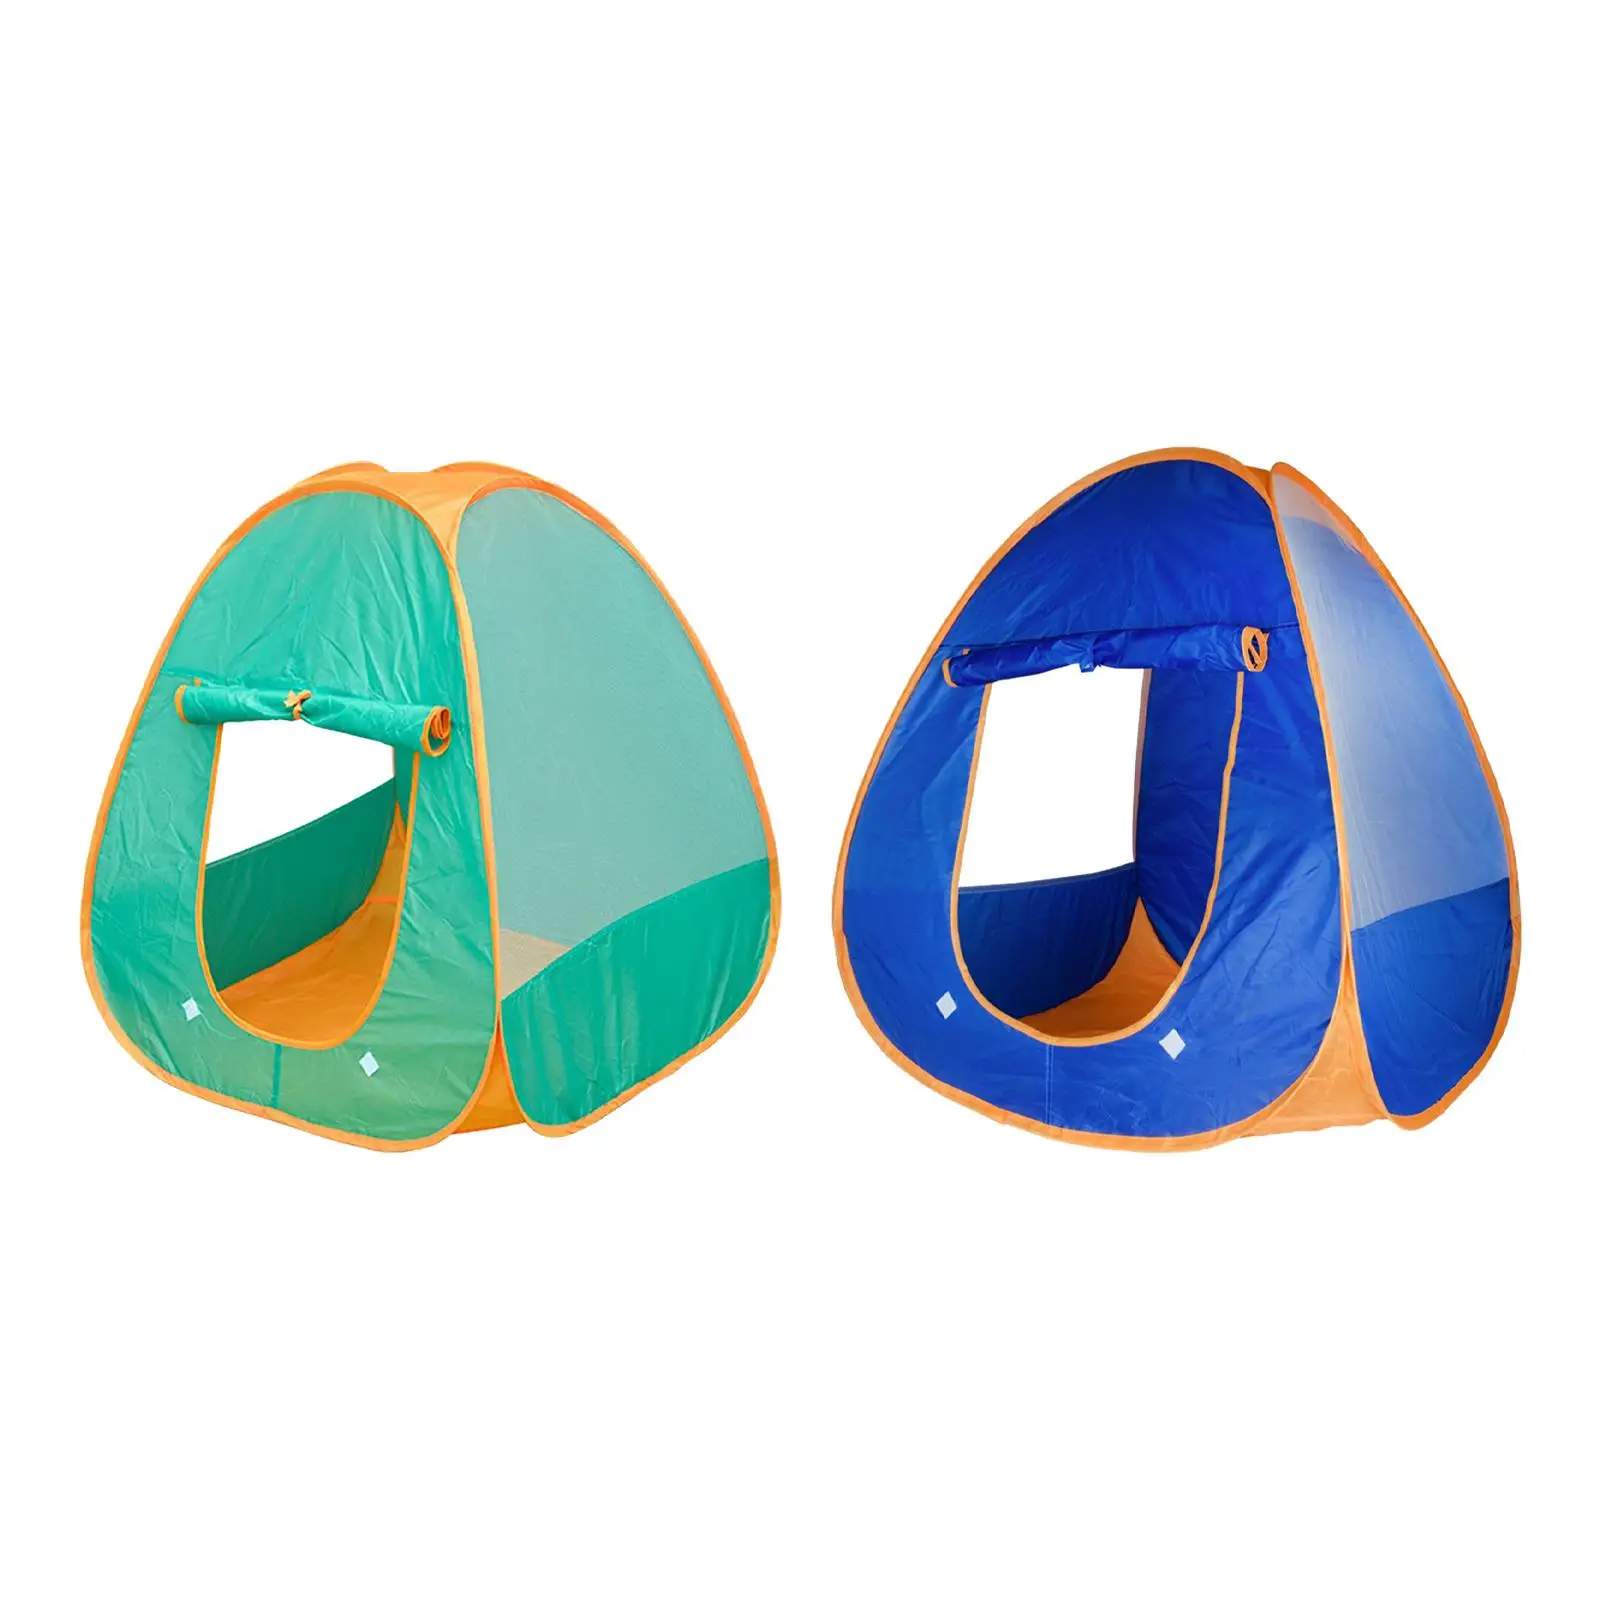 Children Play Tent Collapsible Role Play Toy Portable Child Room Decoration for Indoor Outdoor Home Party Camping Nursery Room